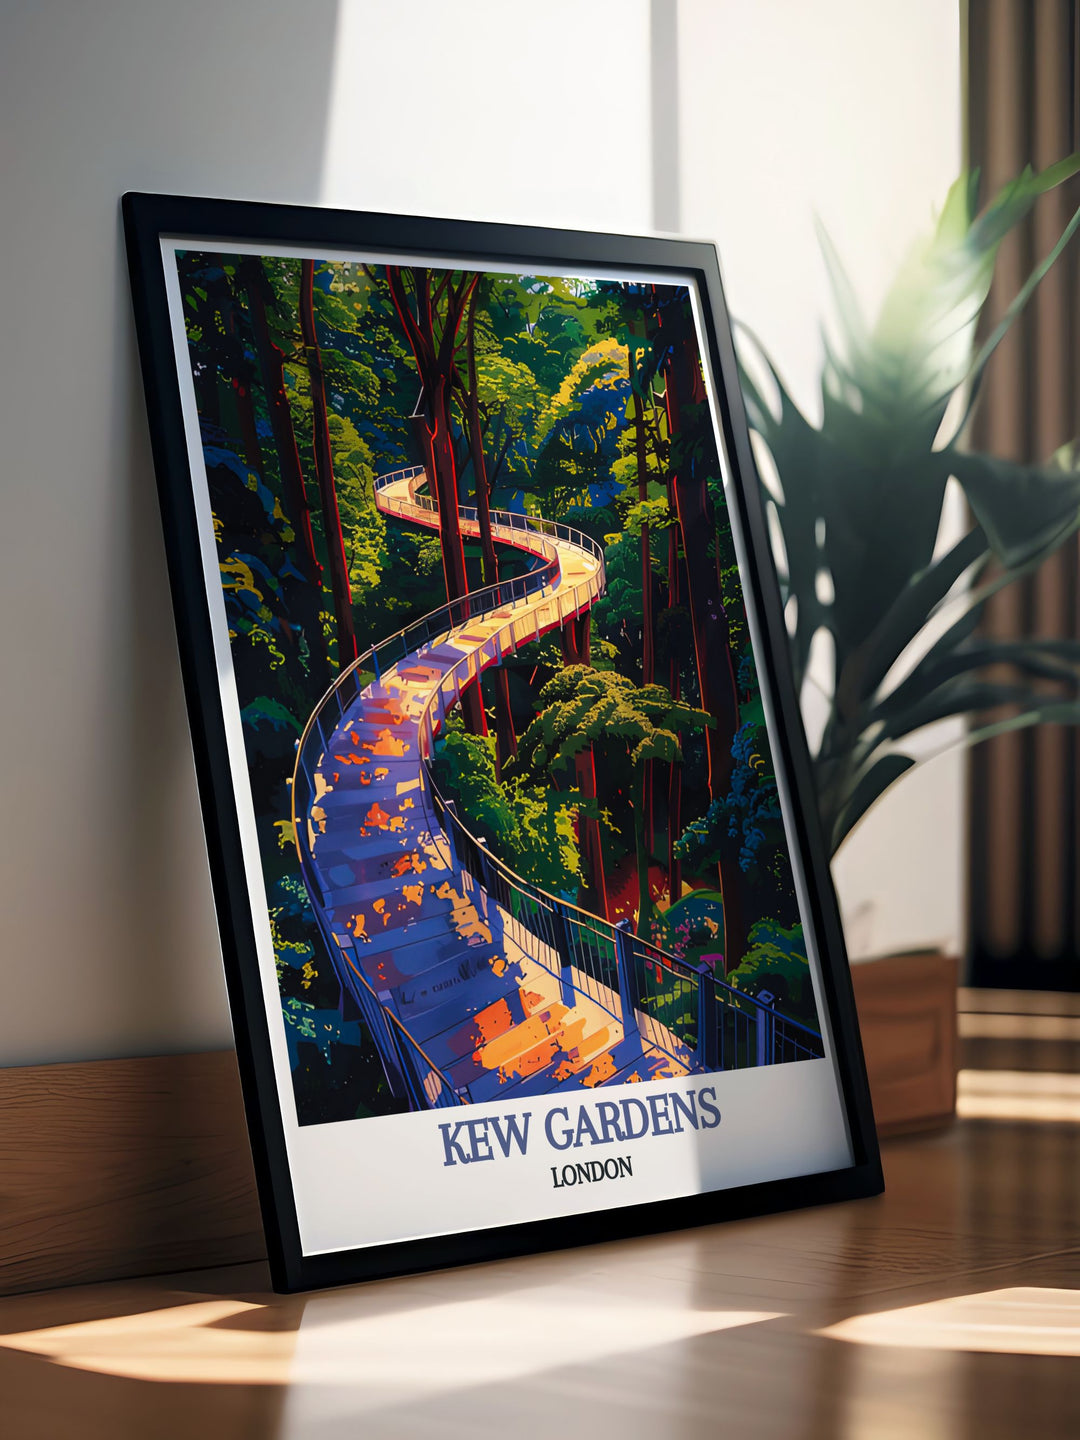 Capturing the lush landscapes and diverse flora of Kew Gardens, this travel poster brings the stunning beauty of these historic gardens into your home decor. Perfect for horticulture enthusiasts and lovers of vibrant landscapes.